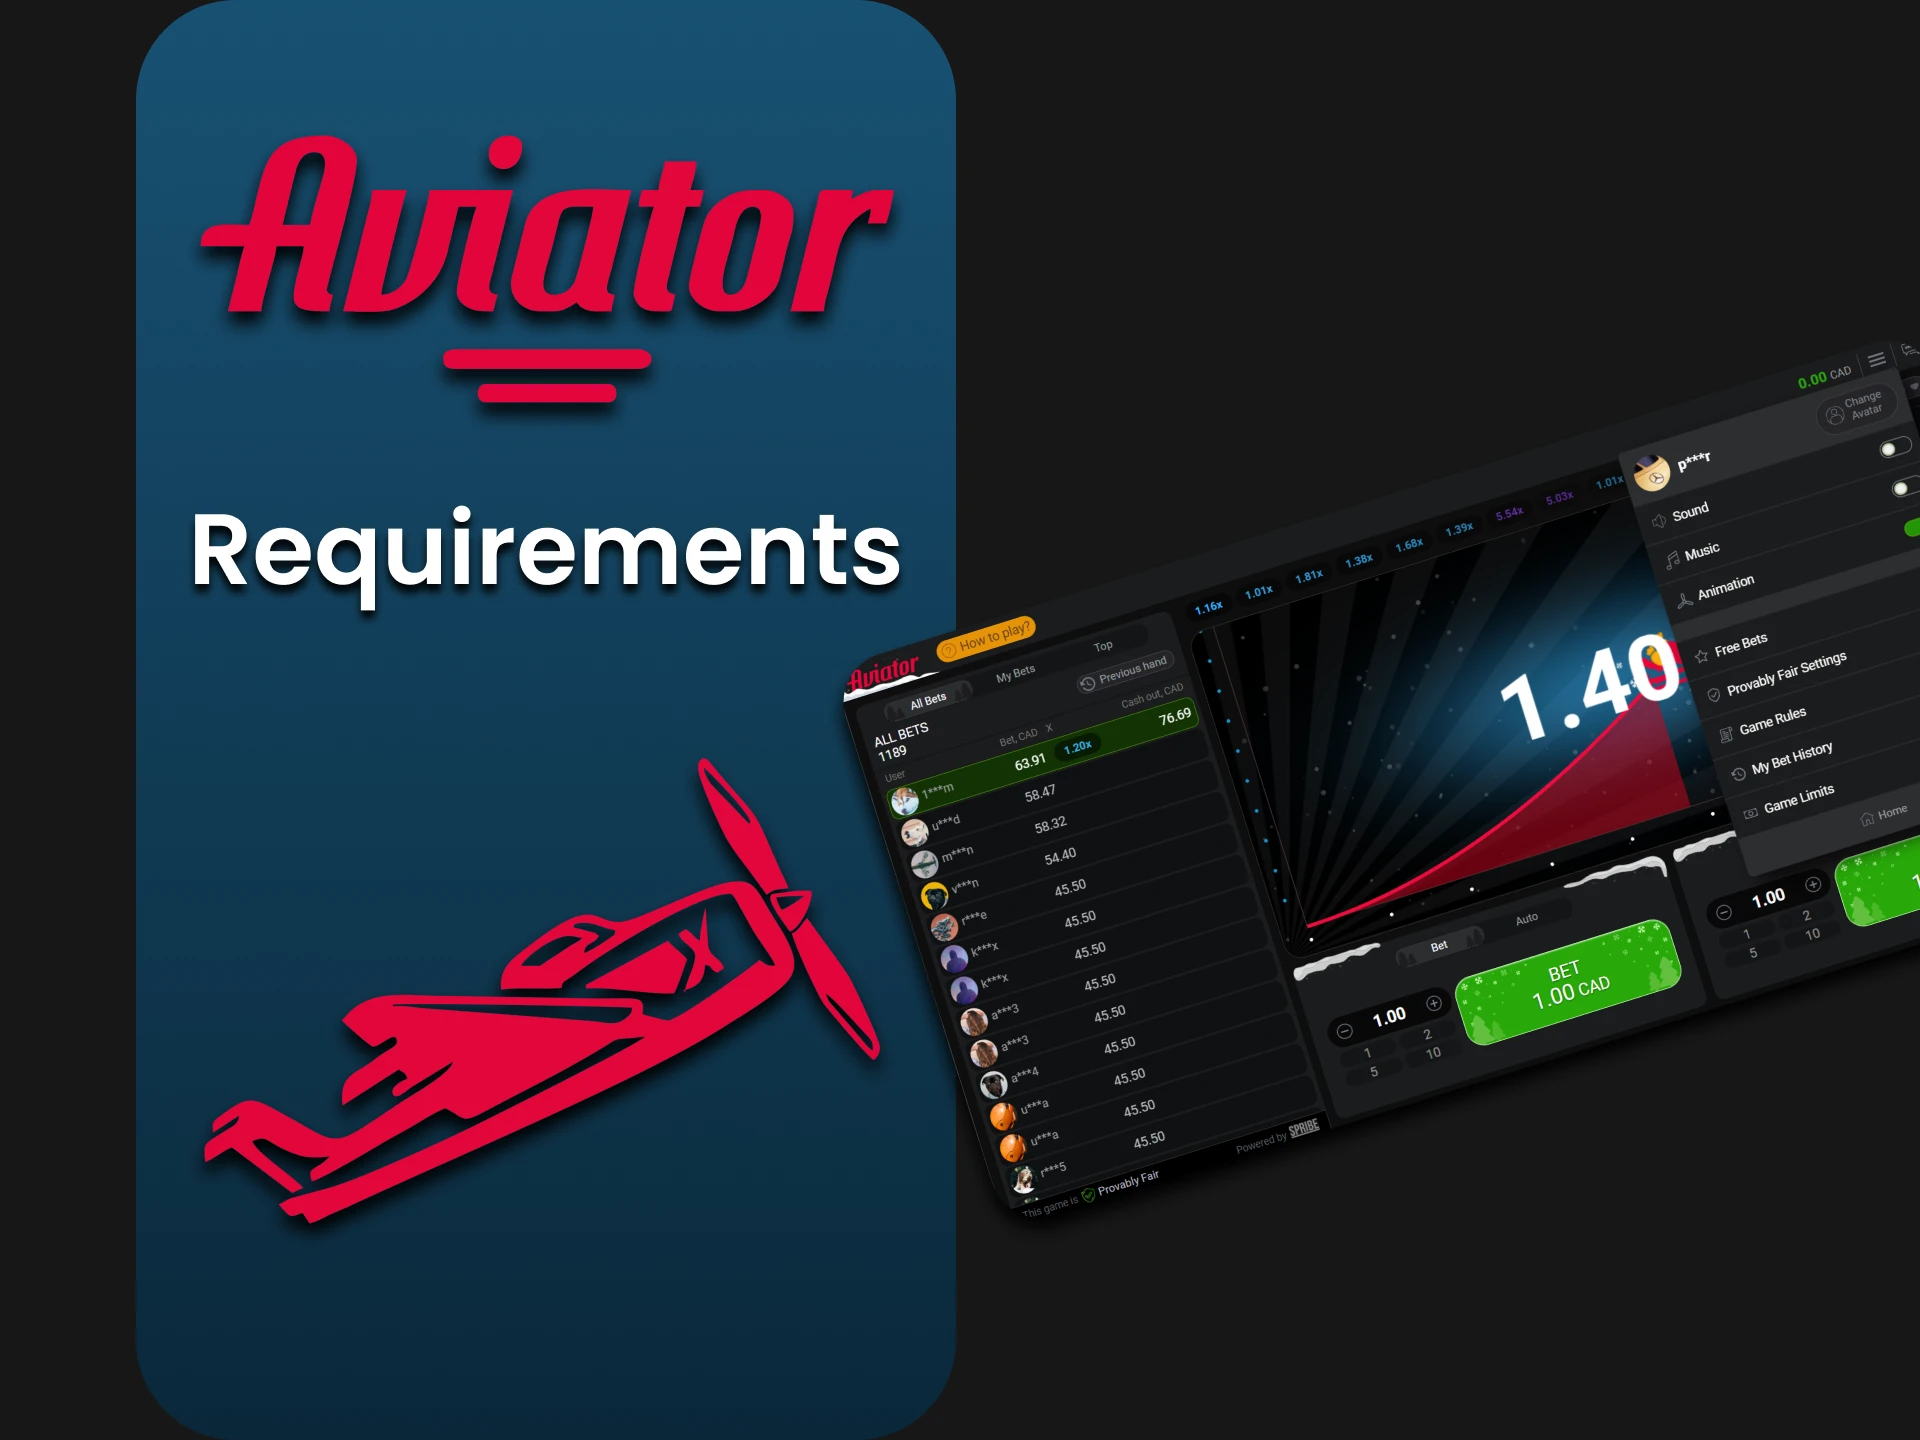 We will tell you about the requirements of the Aviator game.